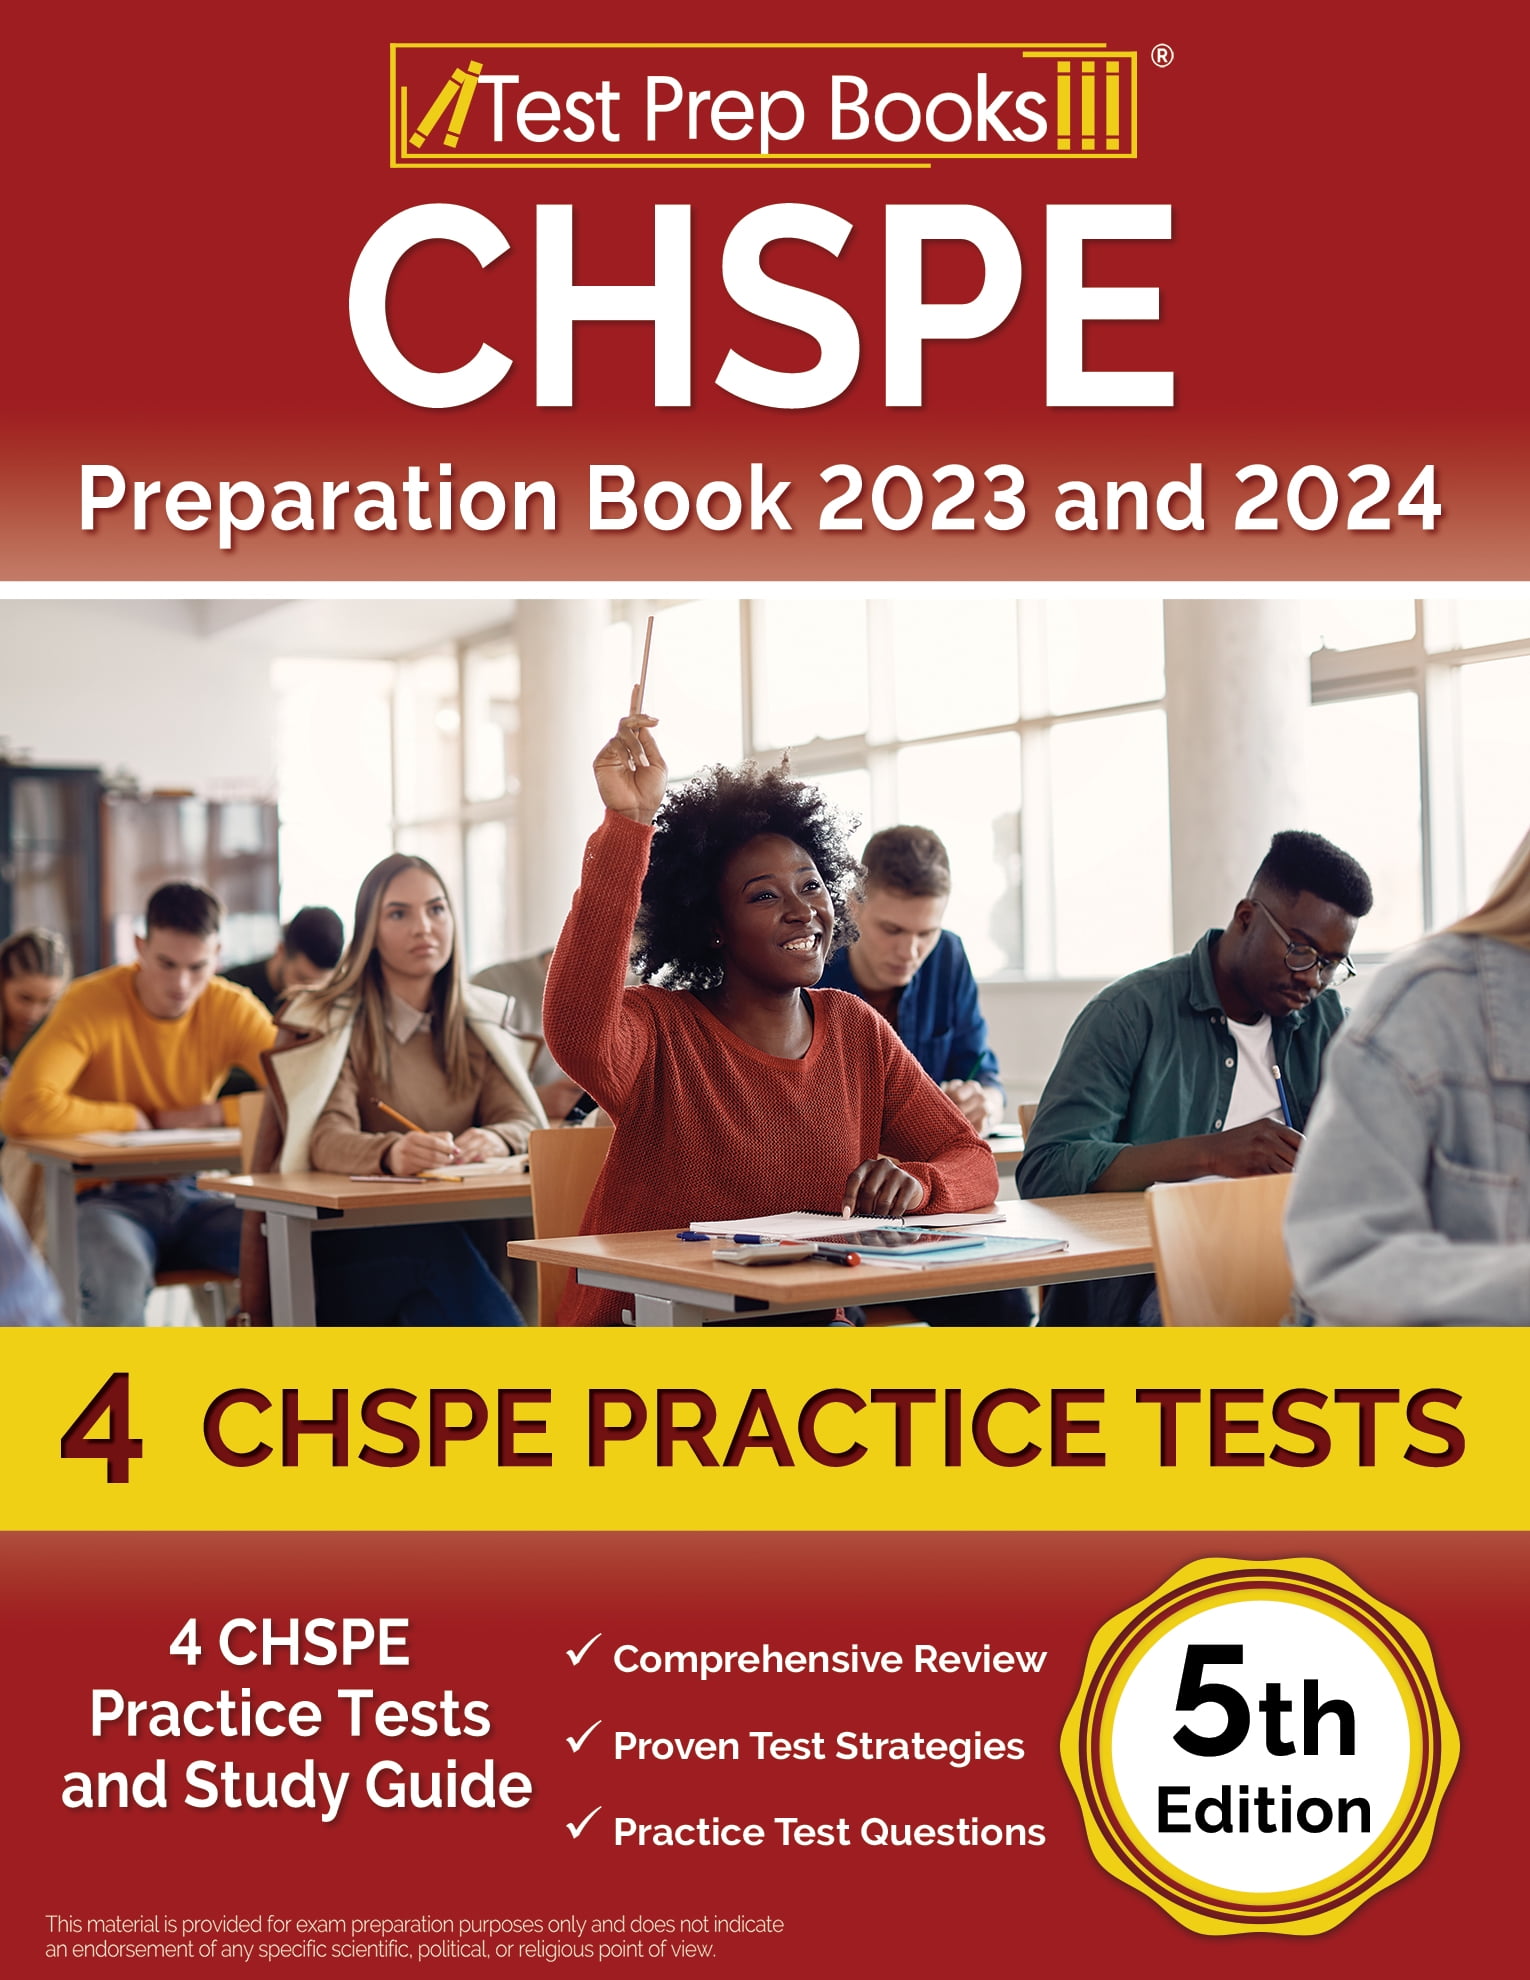 CHSPE Preparation Book 2023 and 2024 4 CHSPE Practice Tests and Study